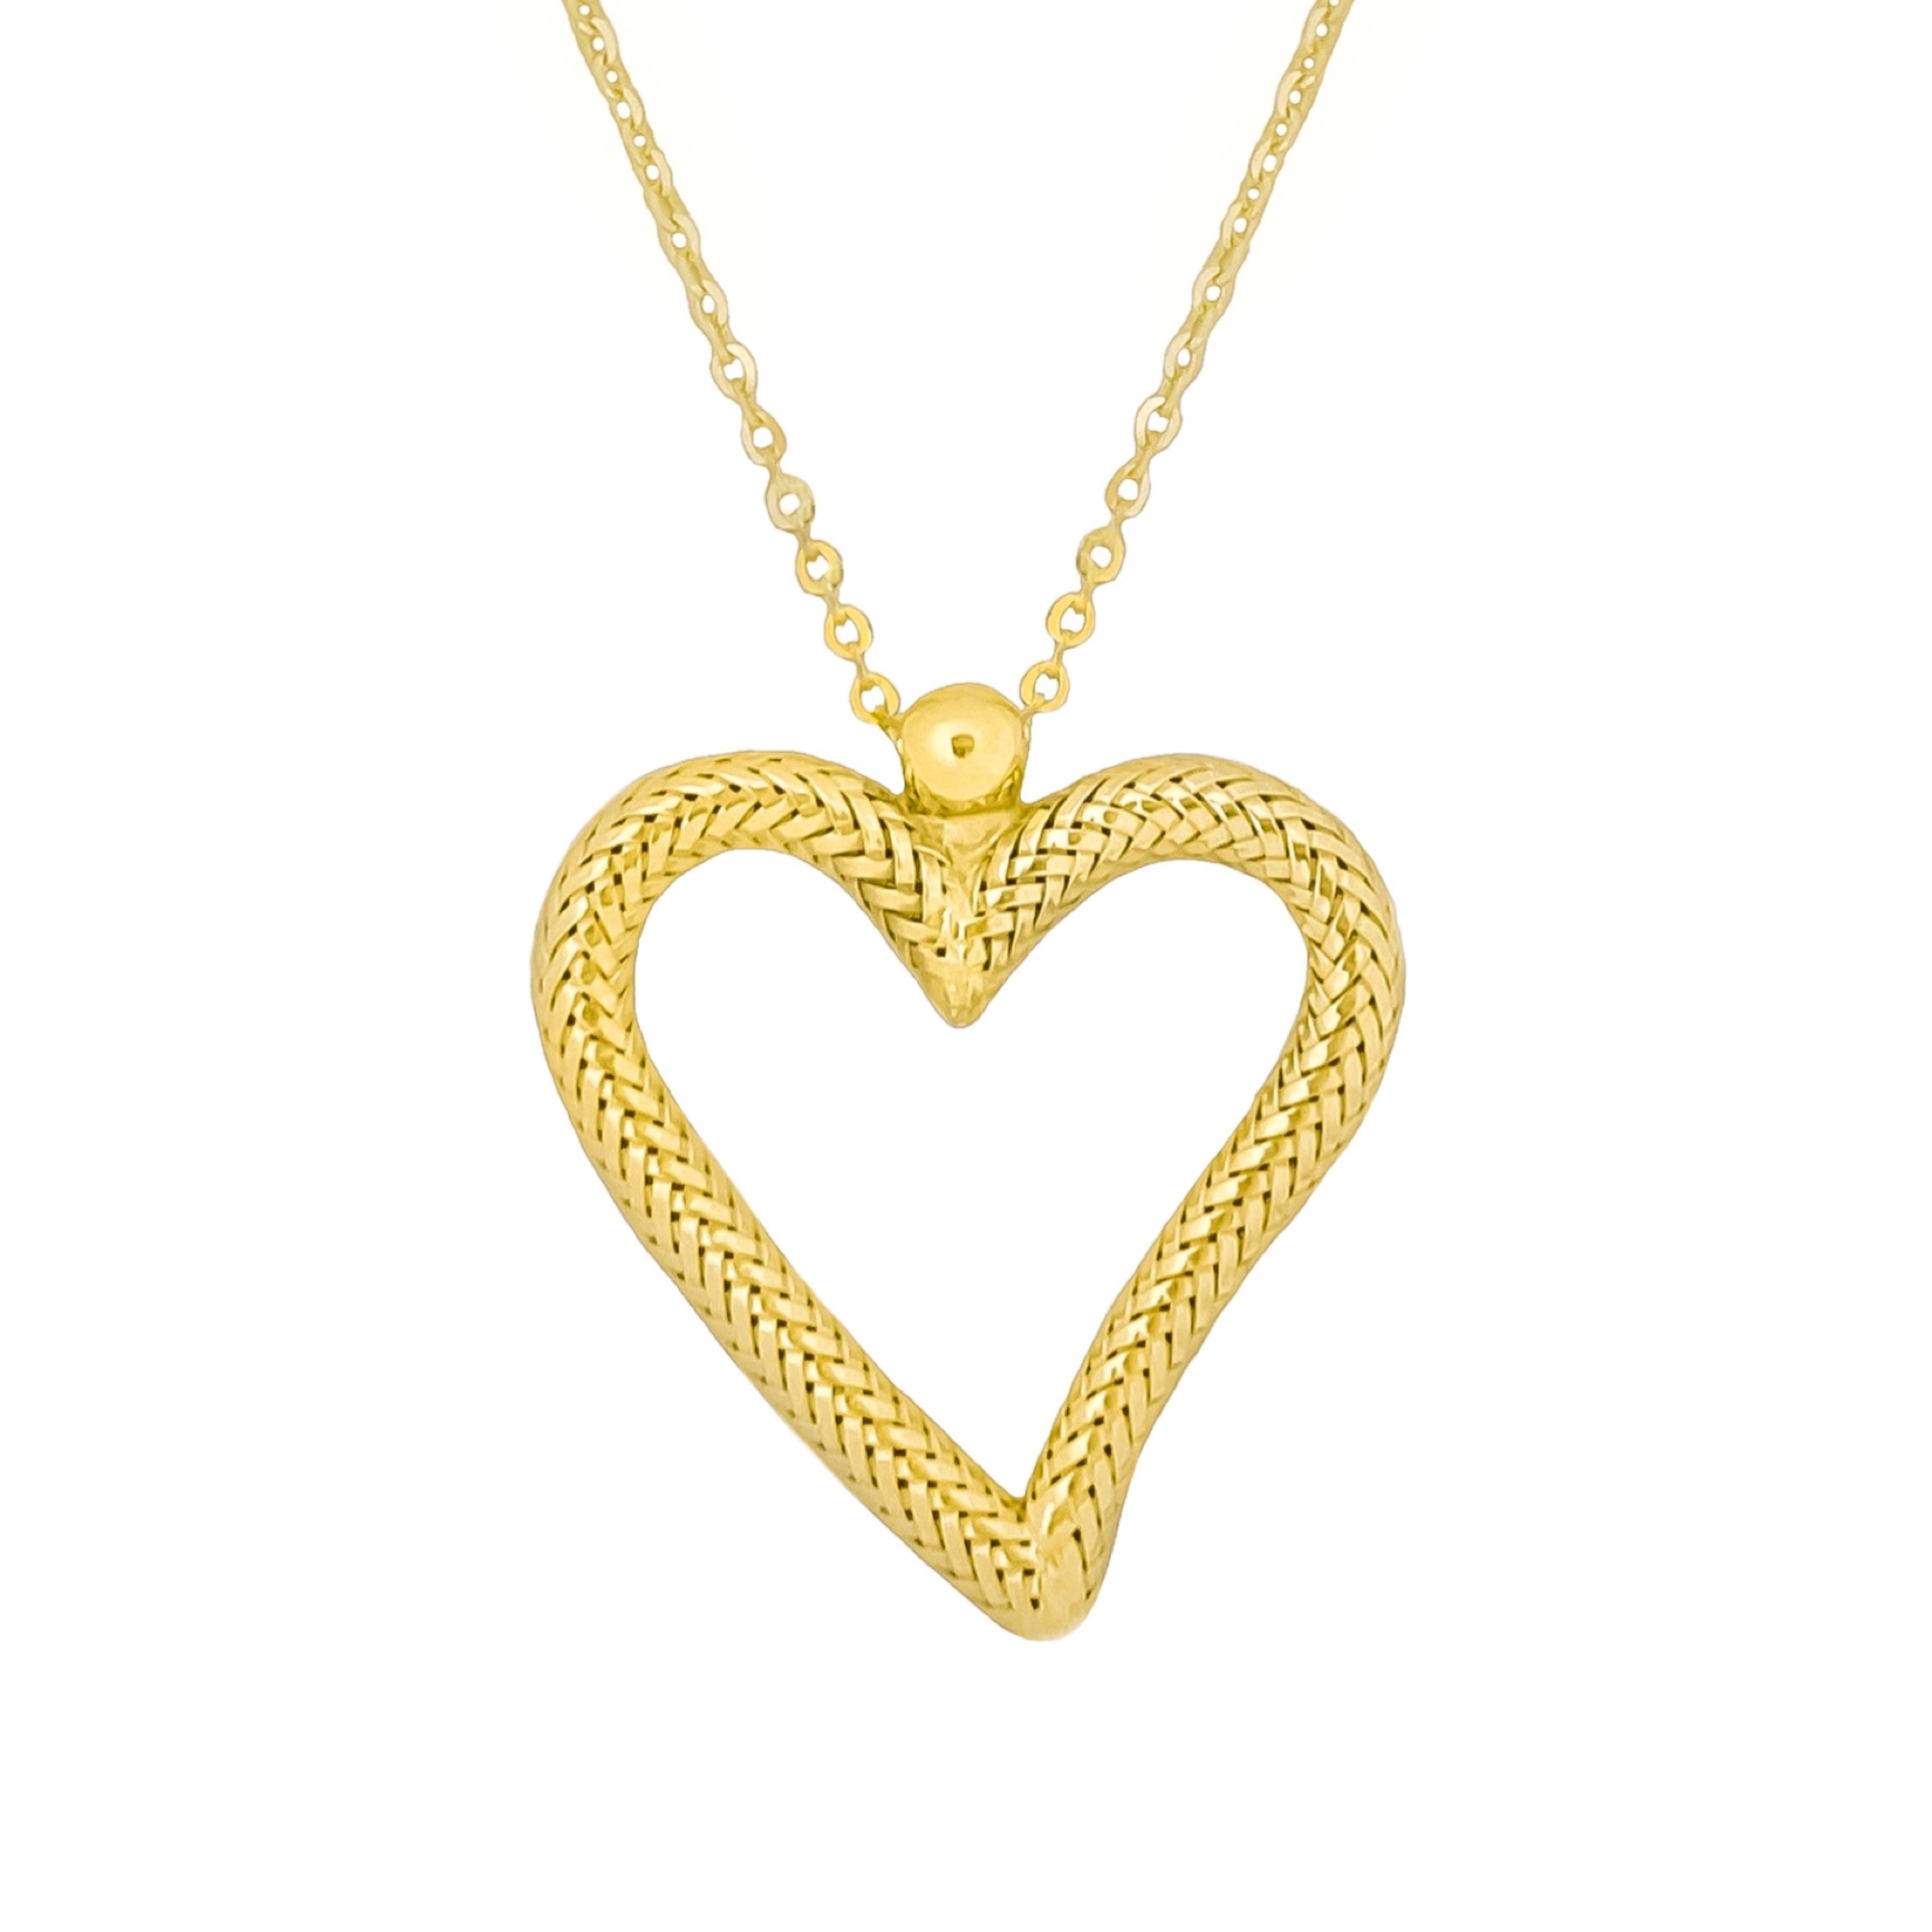 10K YELLOW GOLD BASKET HEART NECKLACE